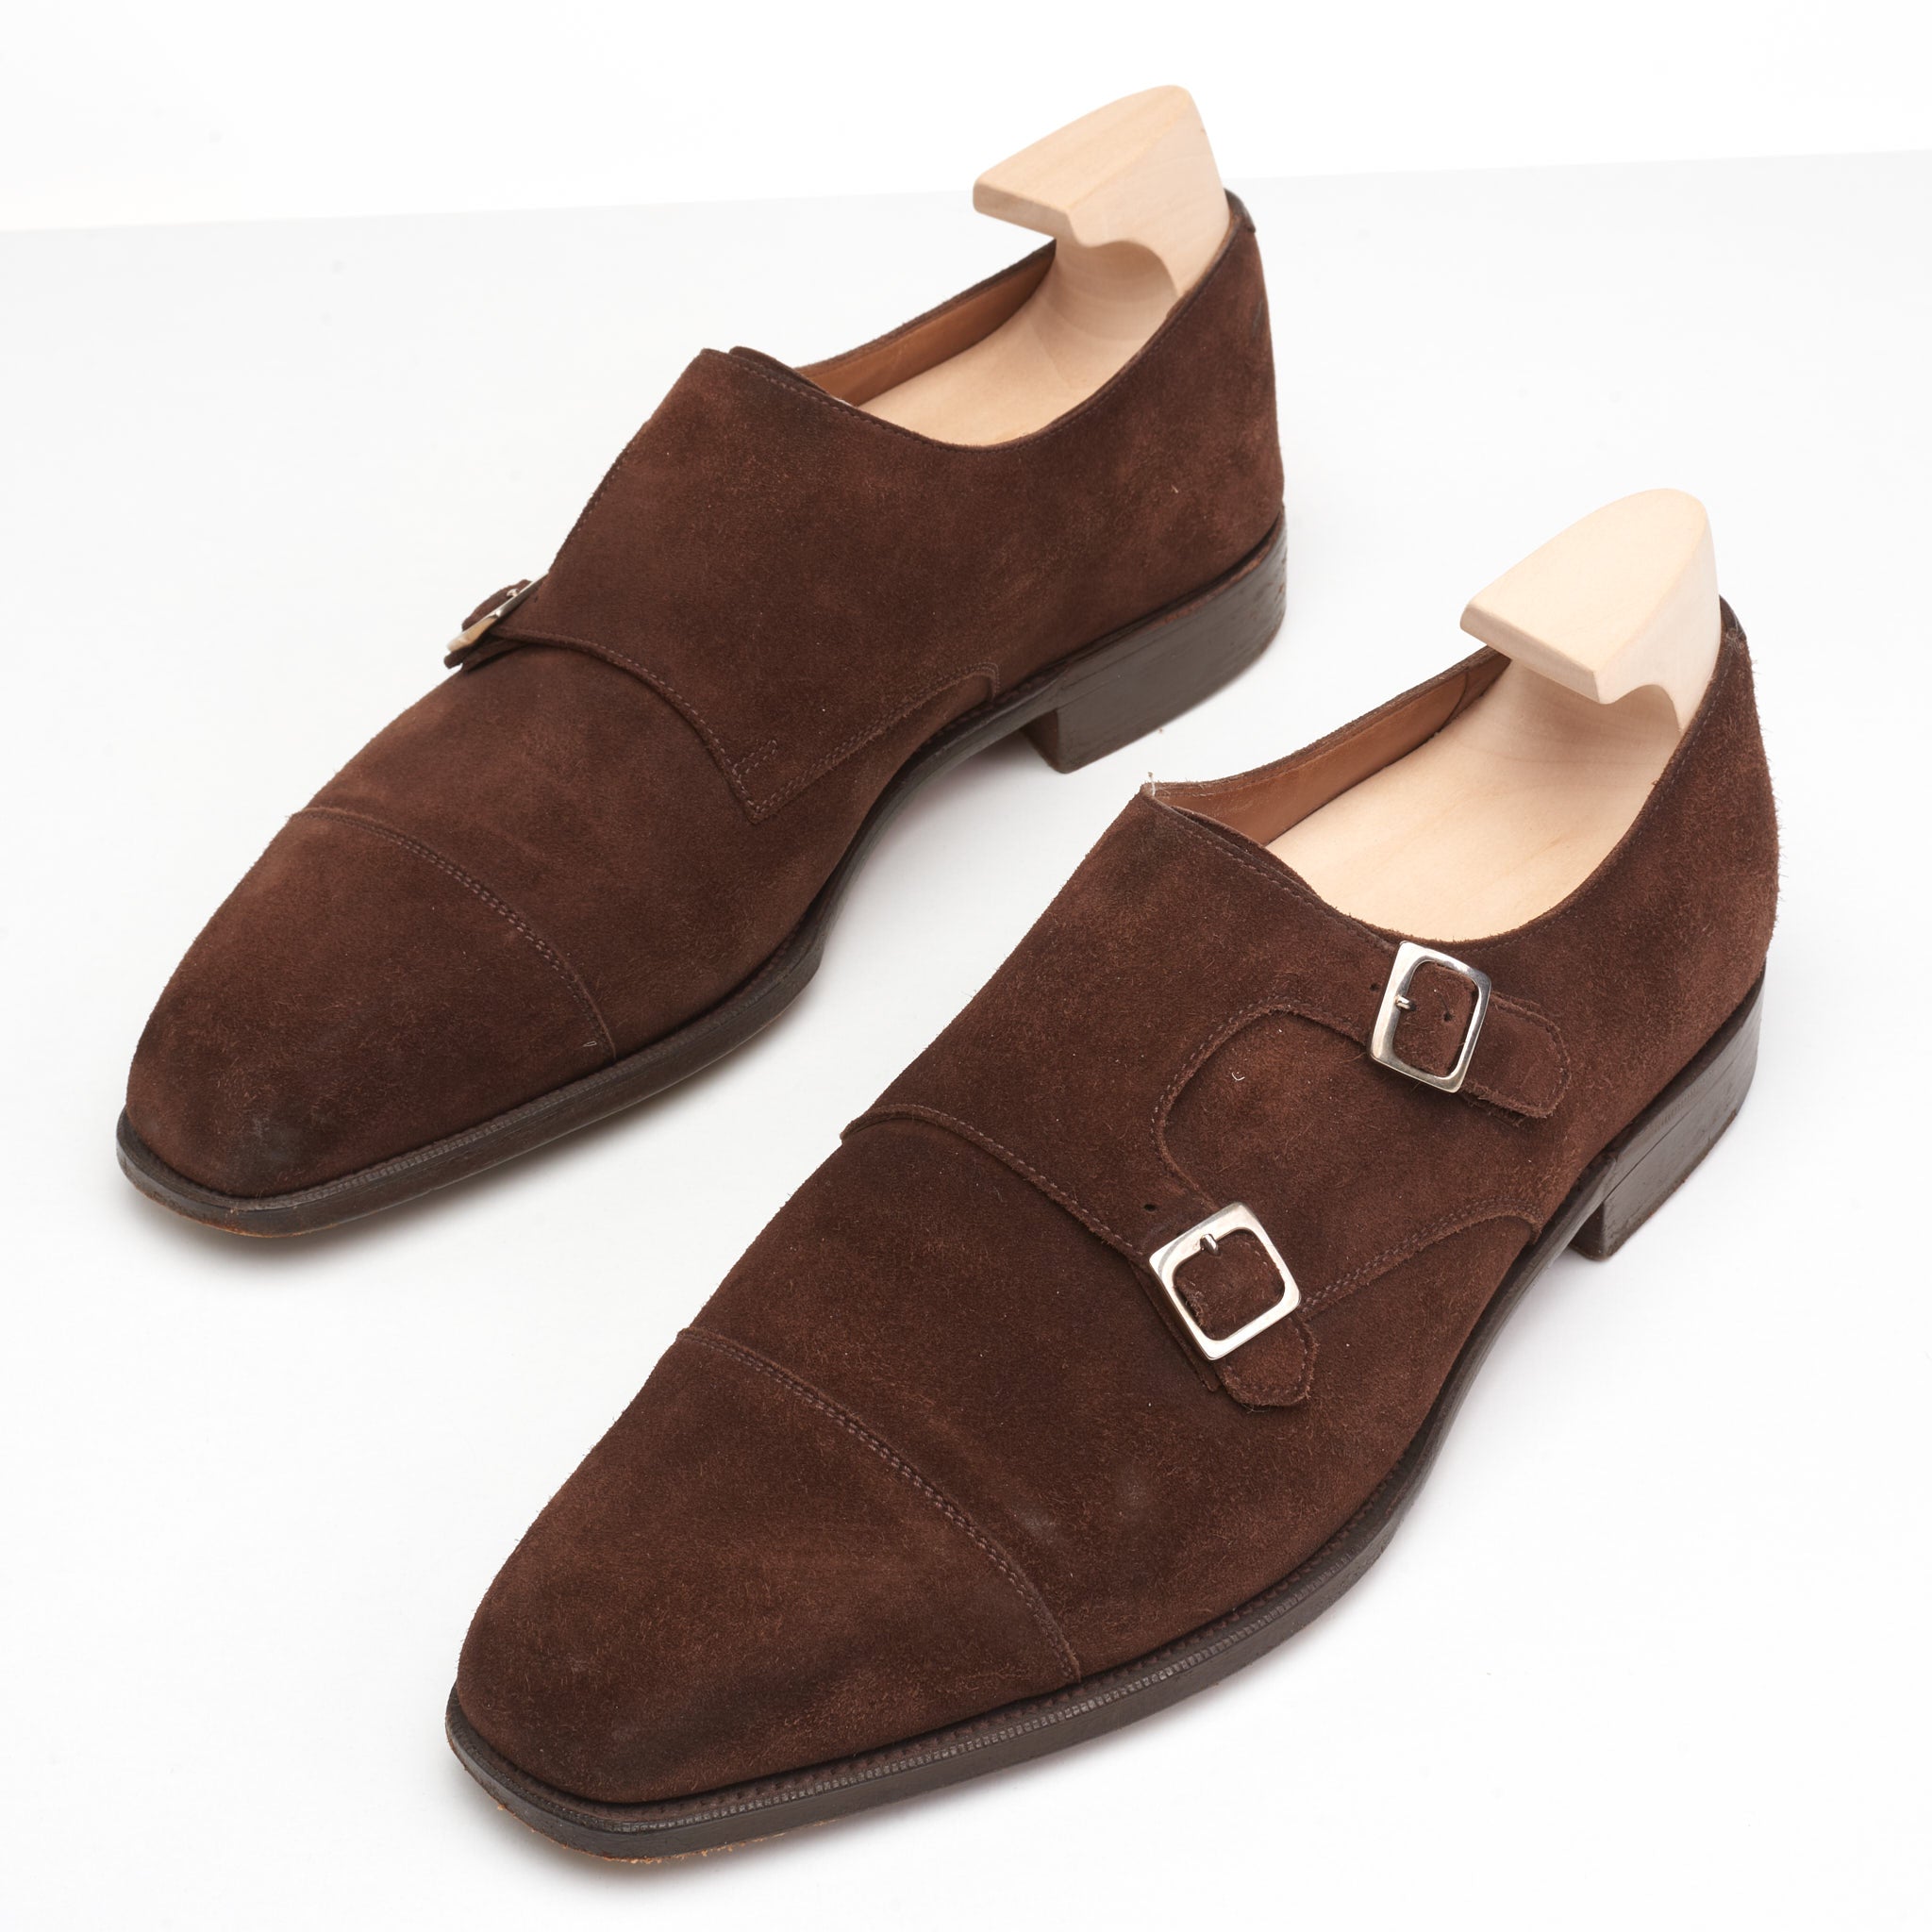 EDWARD GREEN Last 888 Brown Suede Leather Double Monk Dress Shoes 8.5 US 9-9.5 EDWARD GREEN